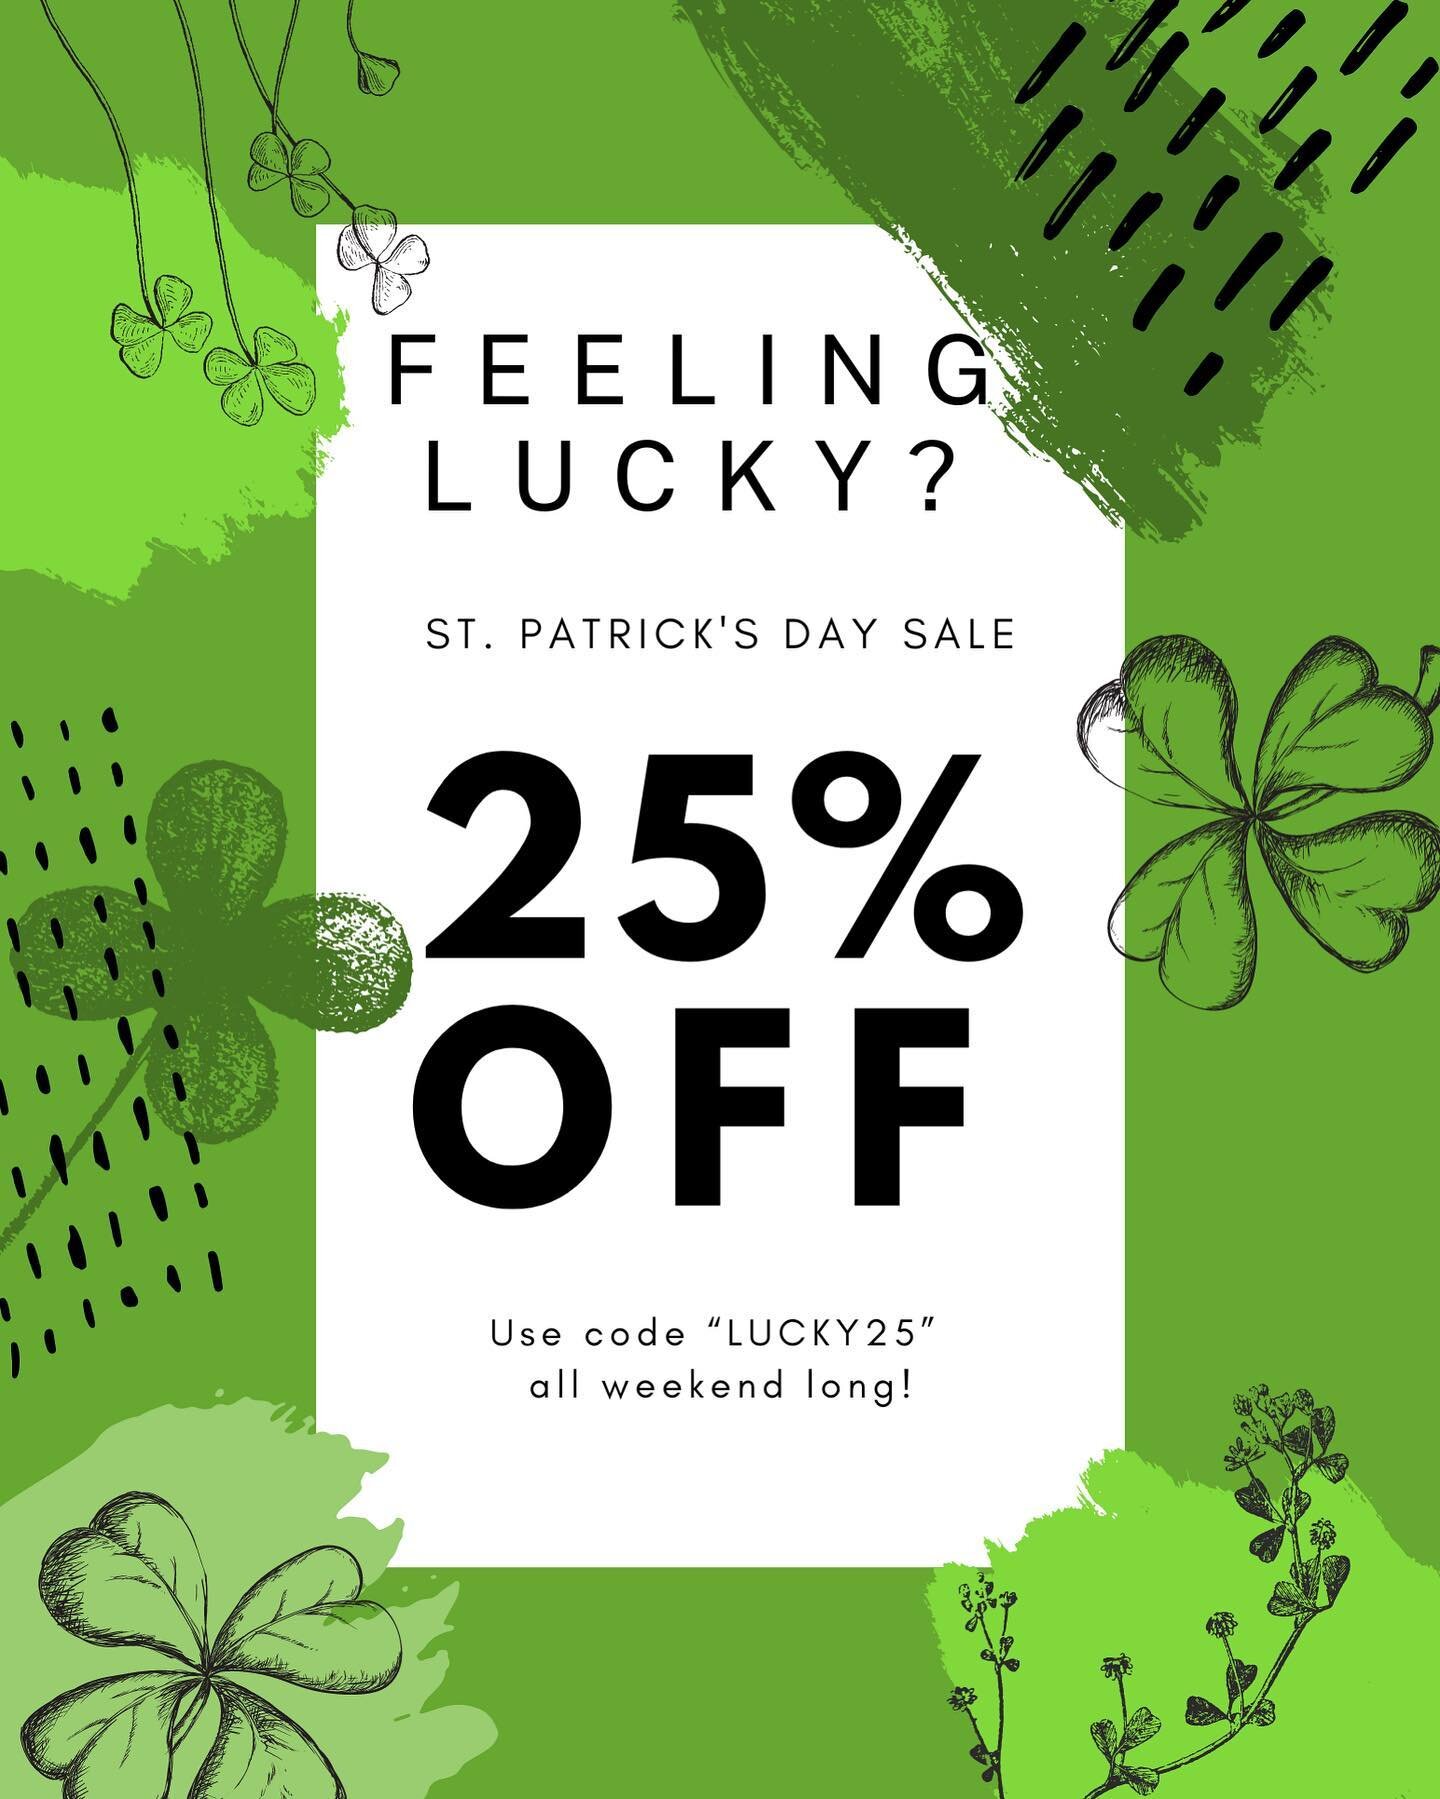 You may not find a pot of gold, but you will find plenty of hidden gems instead! And a great place to grab a pint to celebrate your Quest (and St Patrick!)
#questing #stpatricksday #scavengerhunt #stpatricksdaysale #escaperoom #walkingtour #thingstod